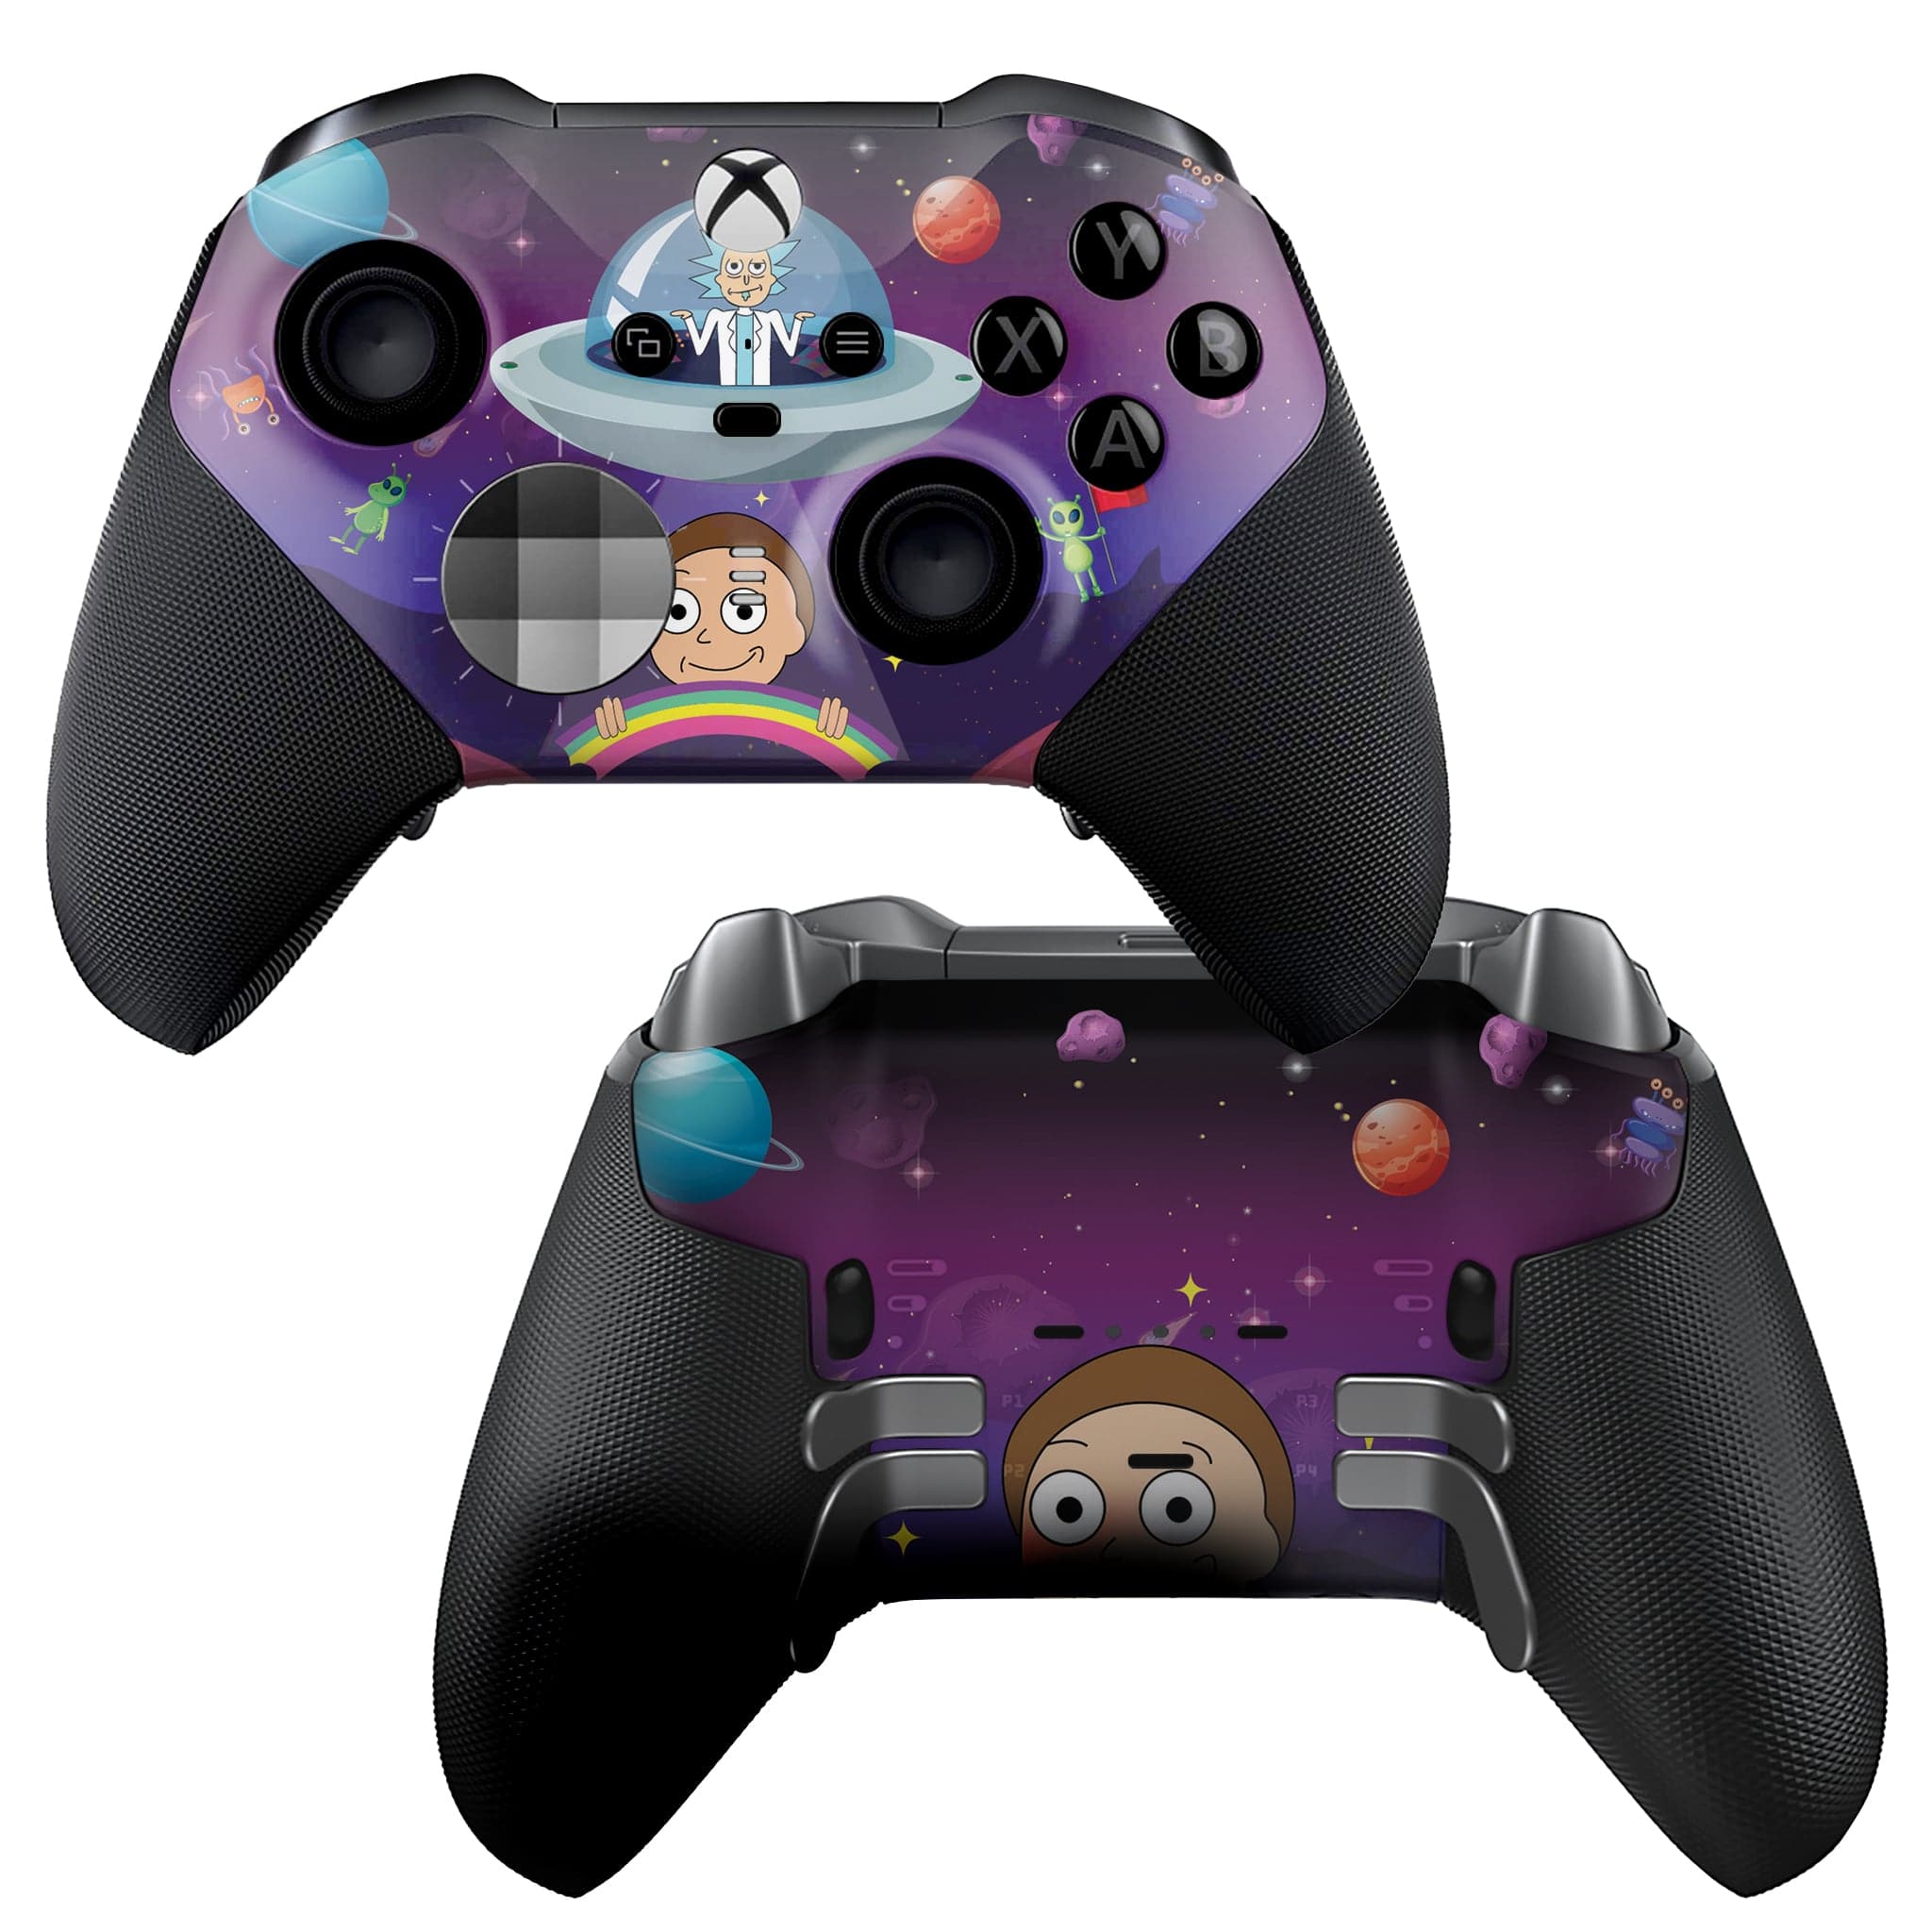 Rick & Morty in Space Xbox Elite Series 2 Controller - Dream Controller